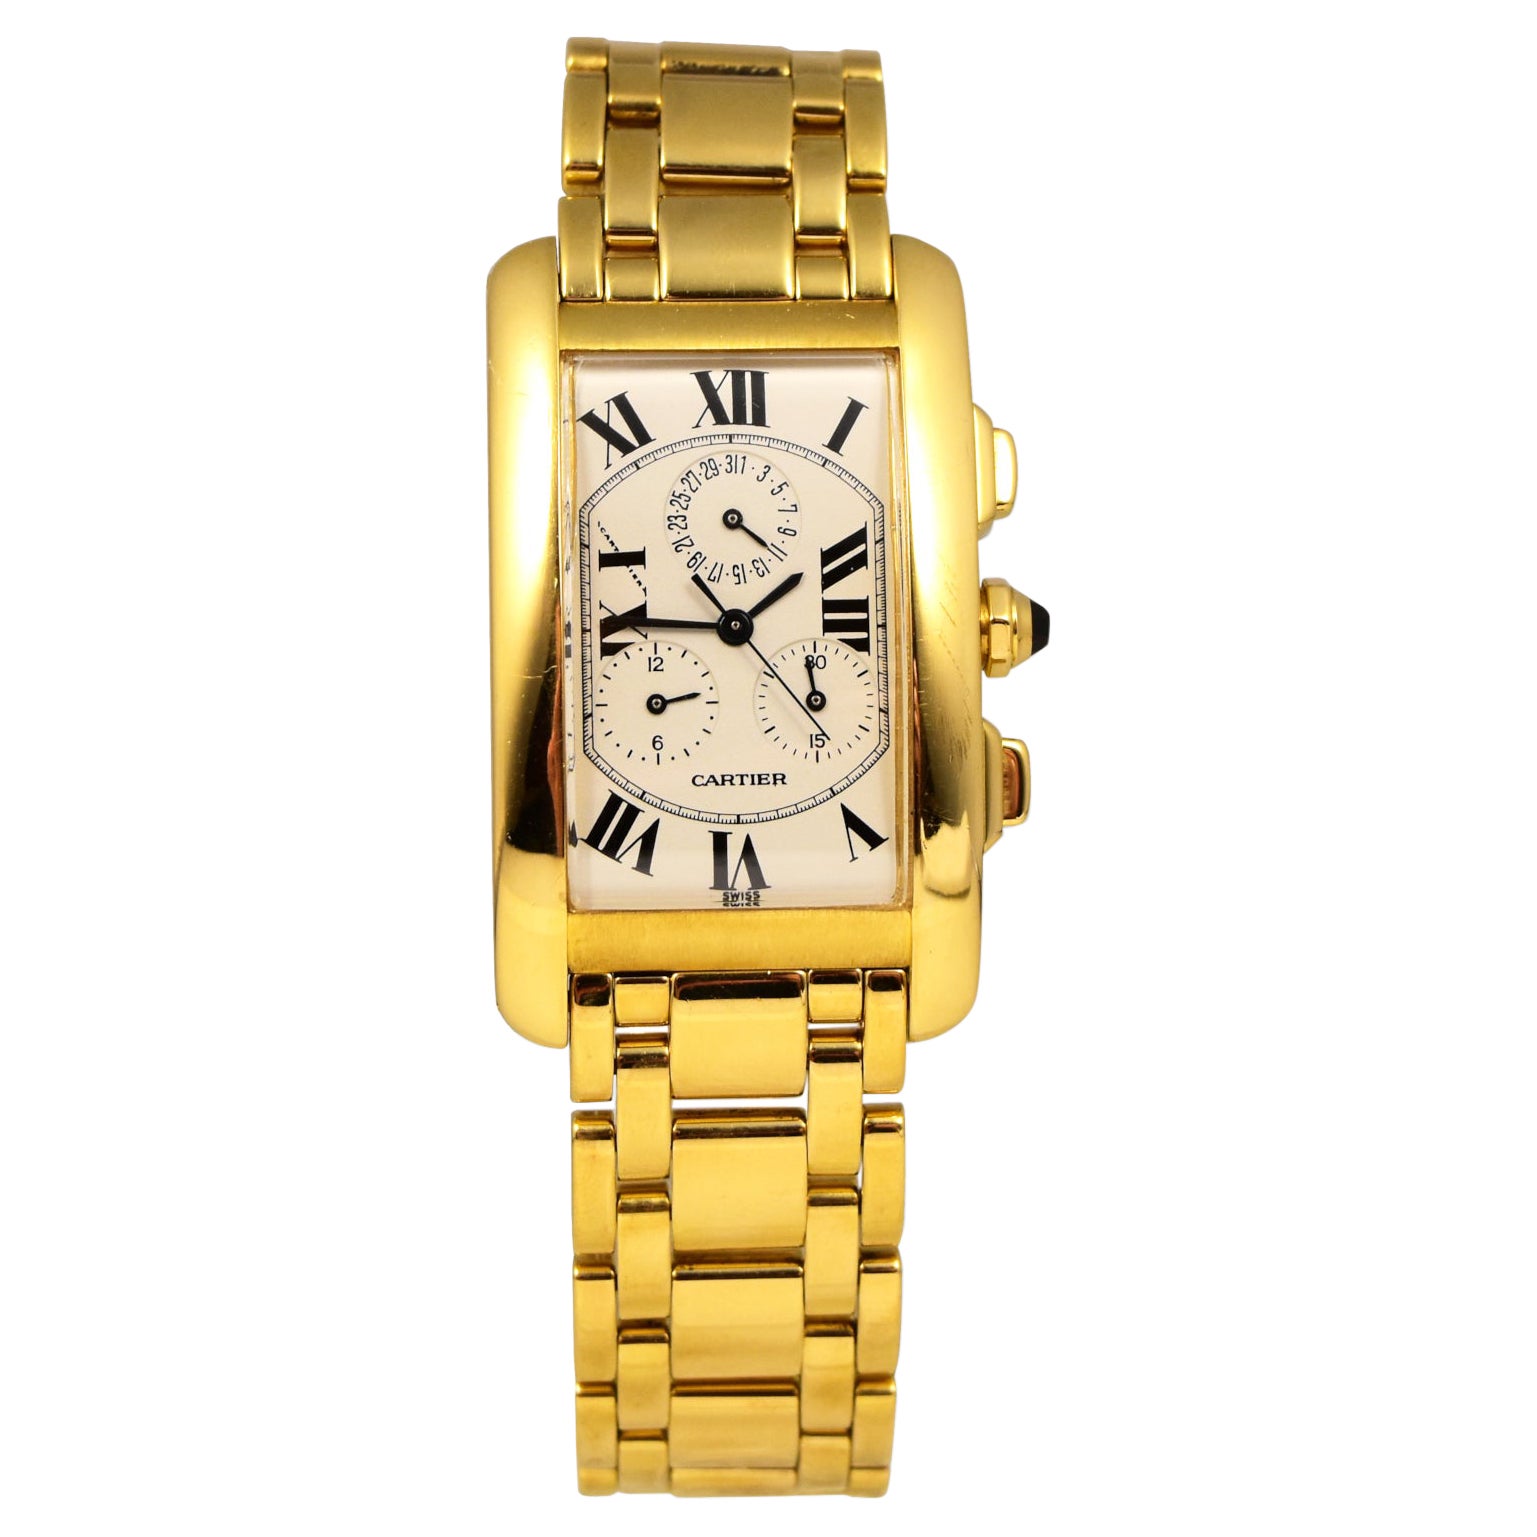 Cartier Tank Americaine Chronograph in 18k Yellow Gold Ref. 1730